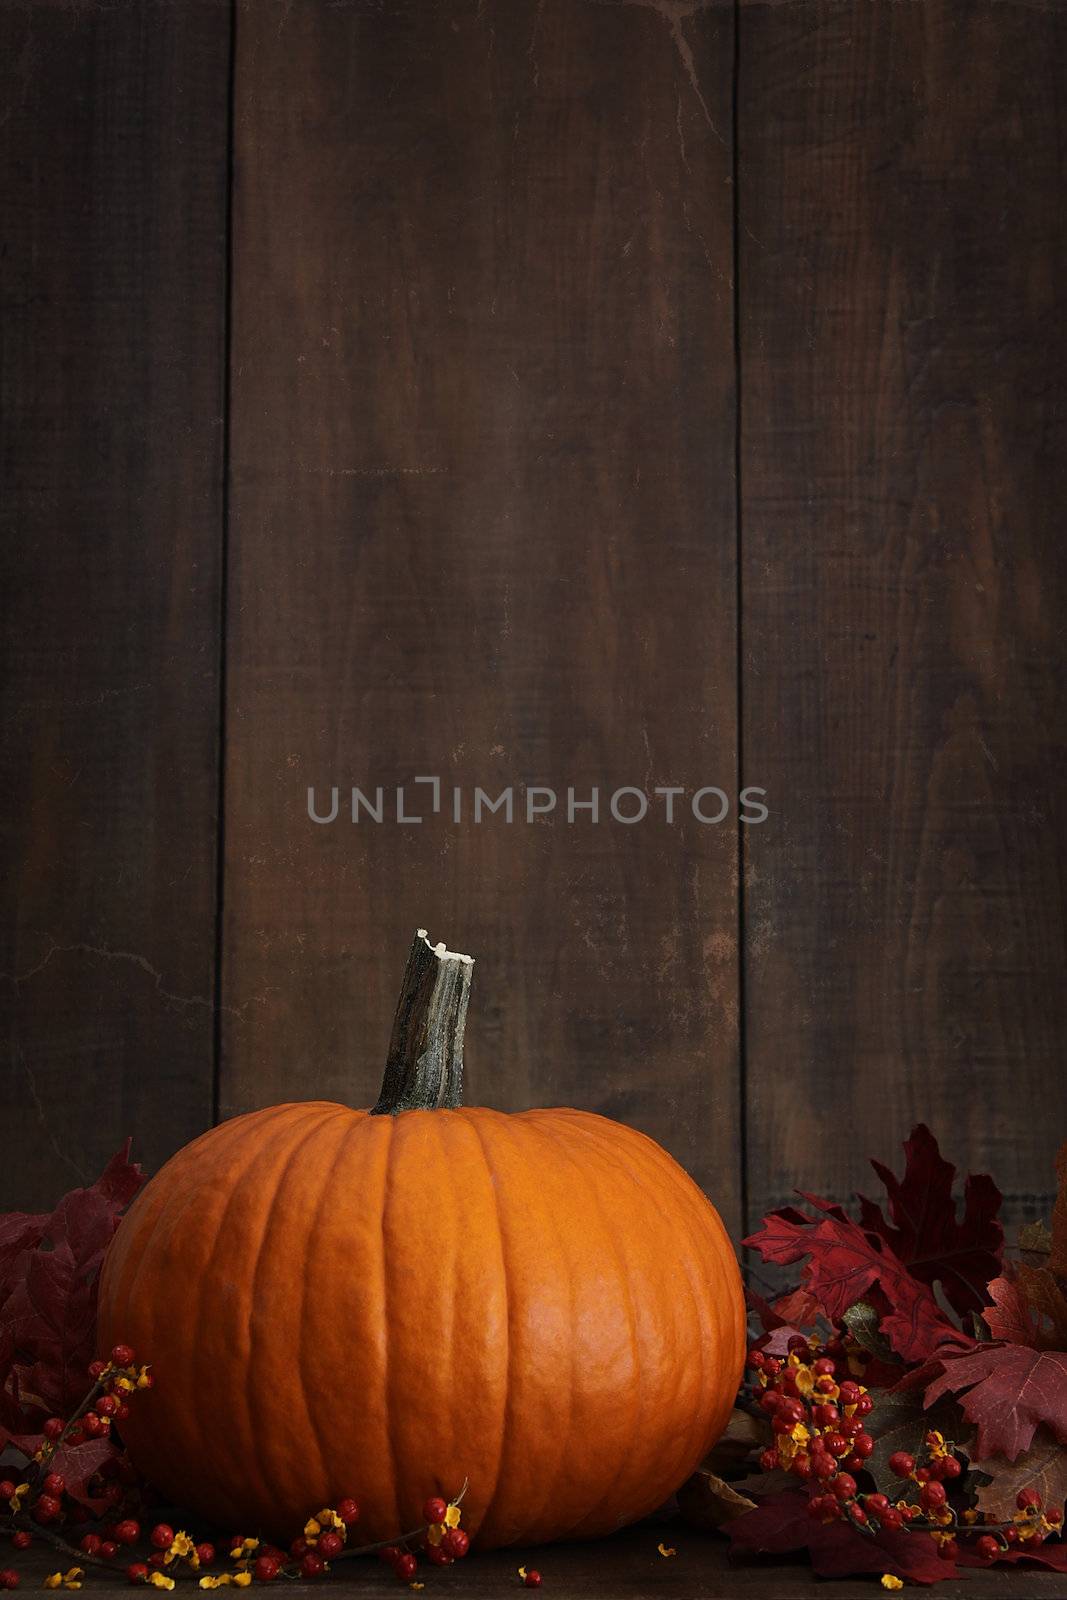 Large pumpkin with leaves against a wood background by Sandralise